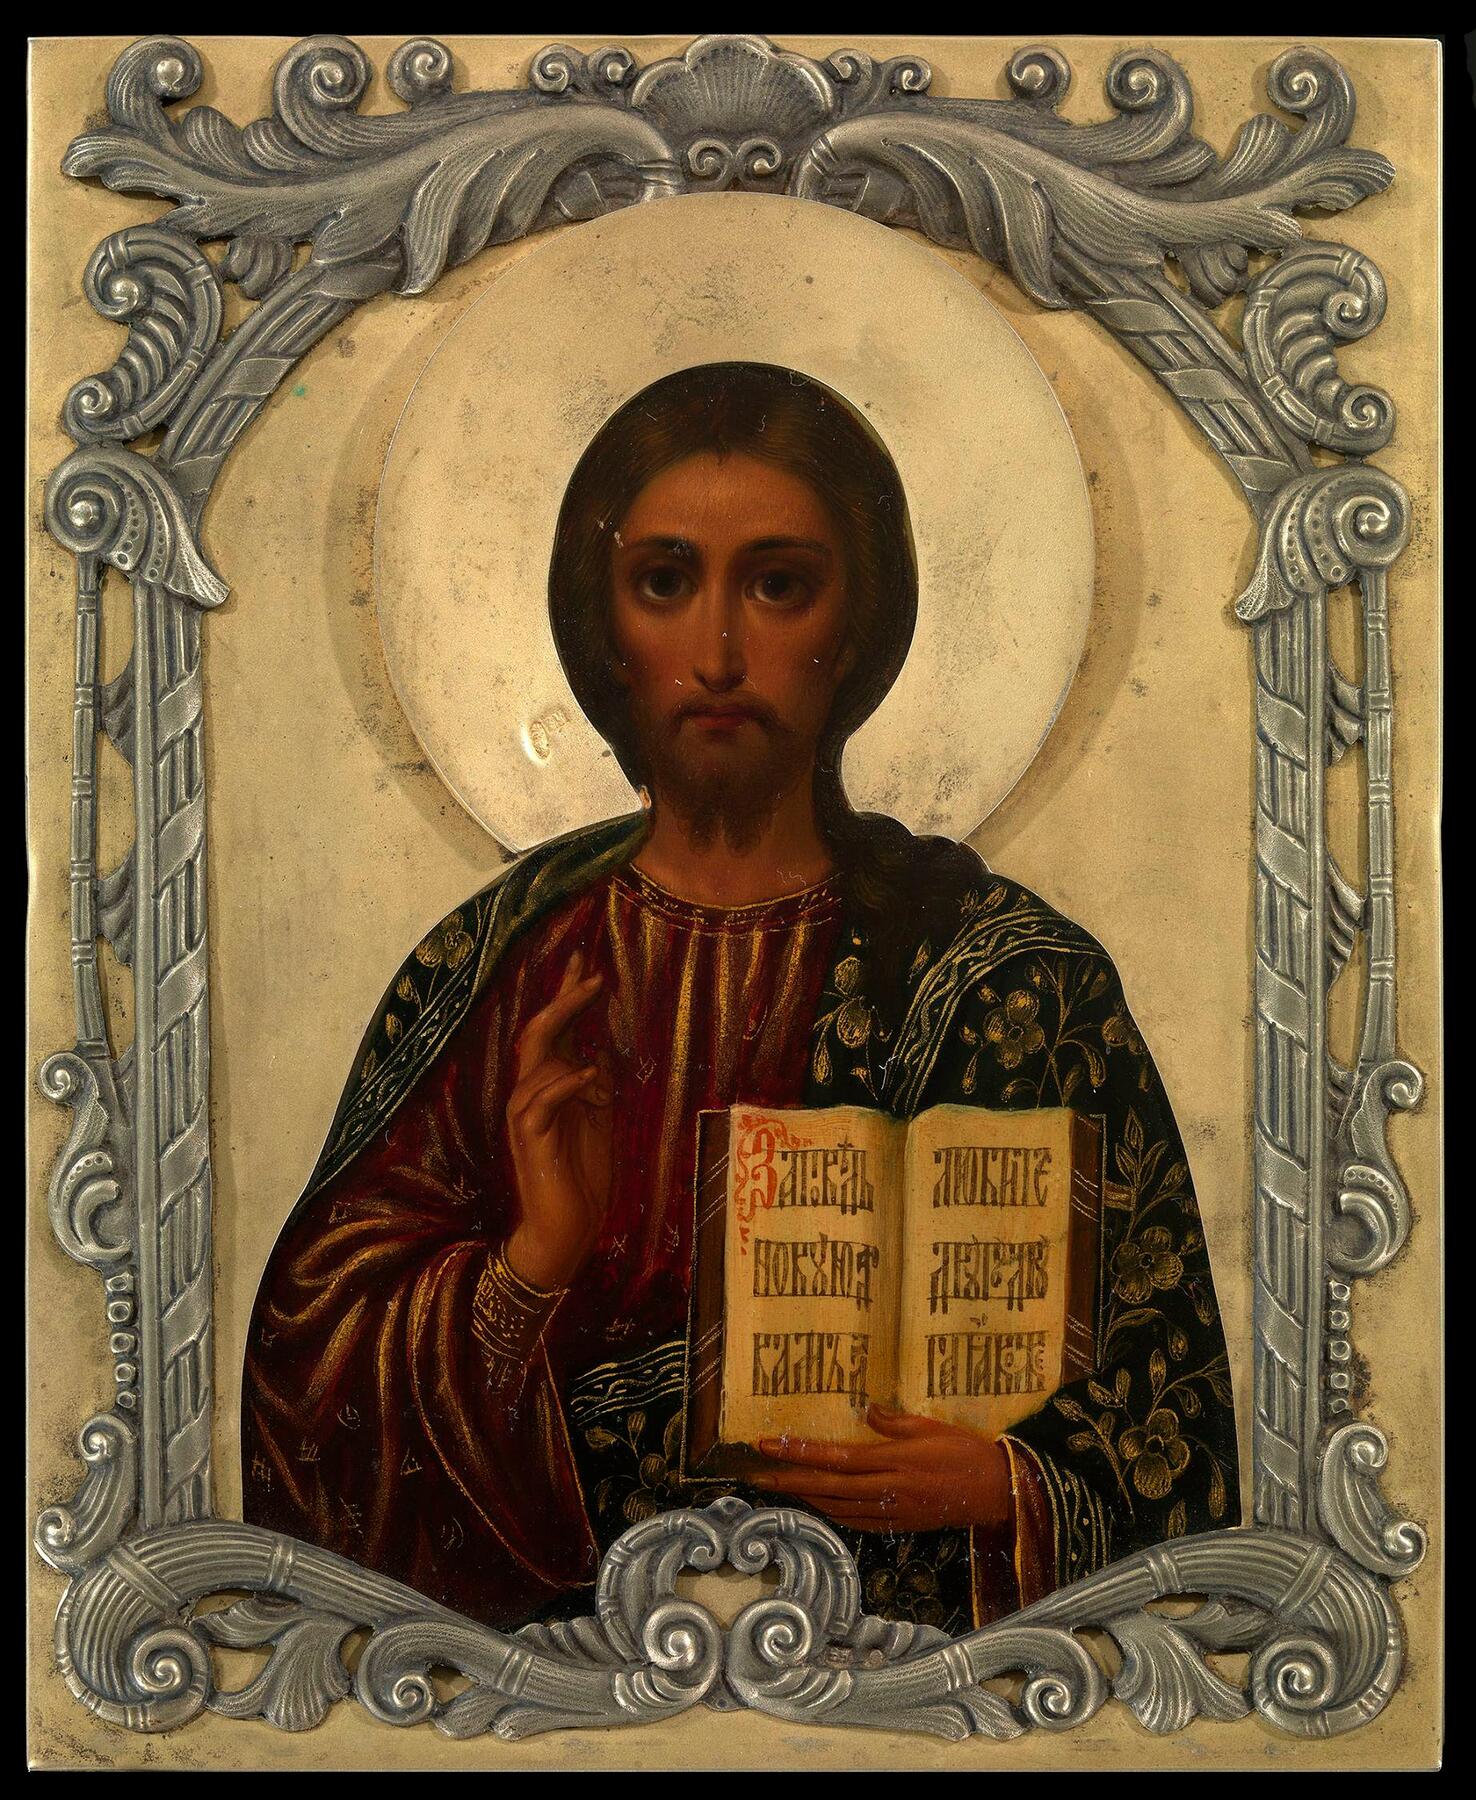 EARLY 20TH CENTURY, OIL ON PANEL, OKLADS STAMPED WITH MAKER'S MARKS EU IN CYRILLIC, MOSCOW, 84 STANDARD.